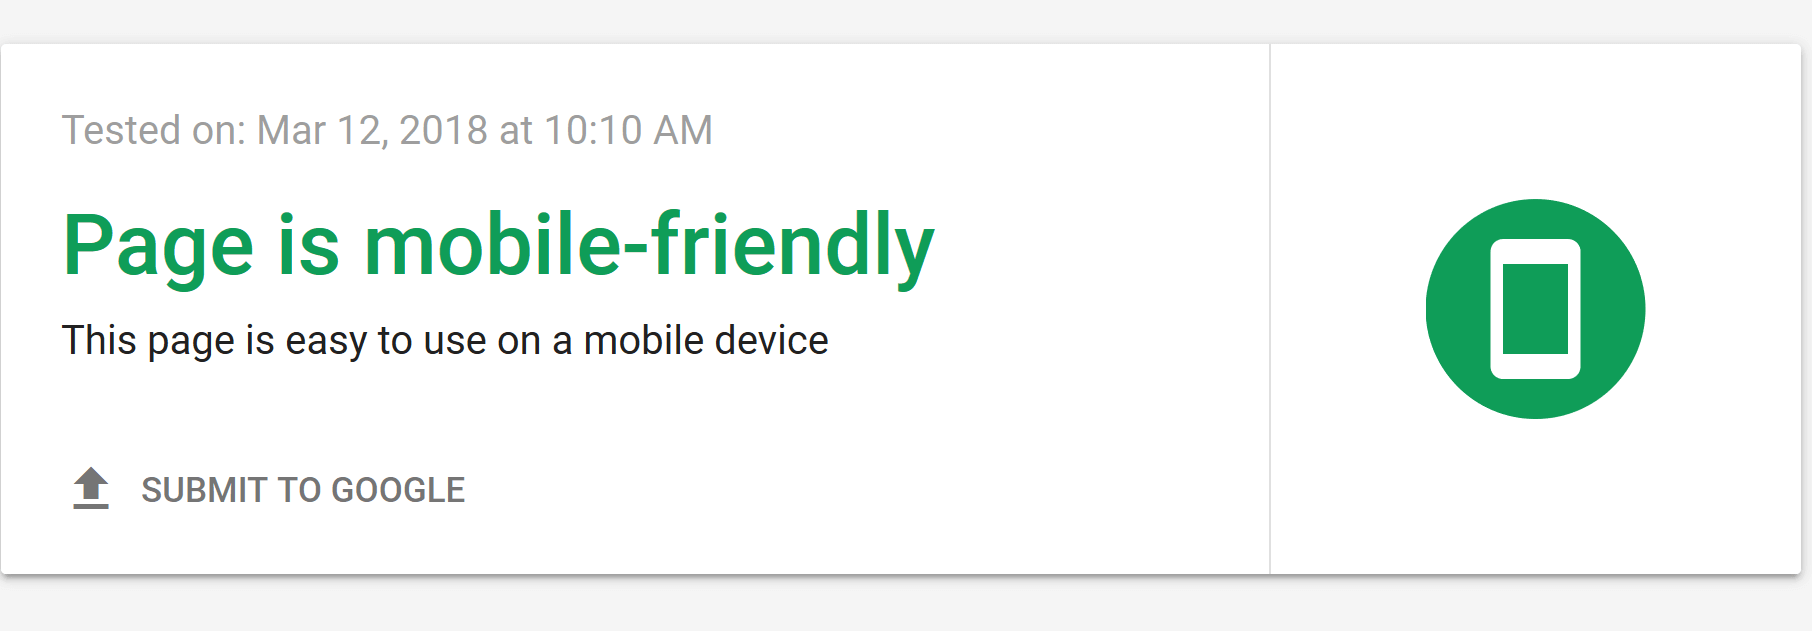 mobile friendly results